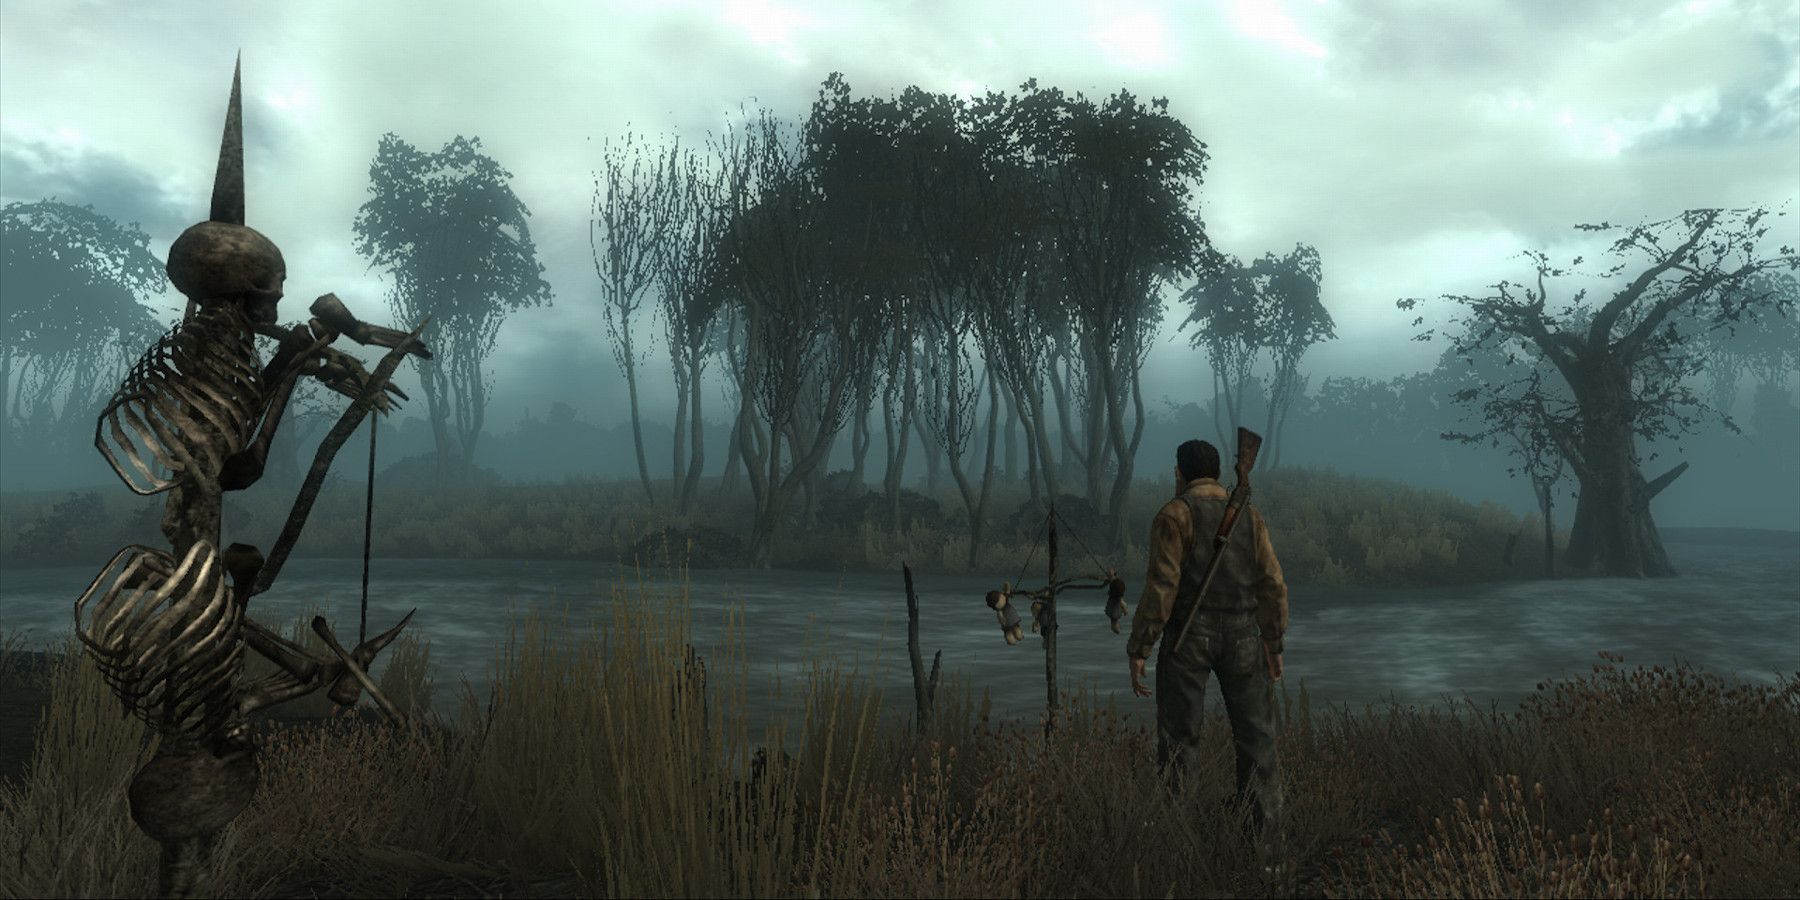 A Location from Fallout 3's Point Lookout DLC